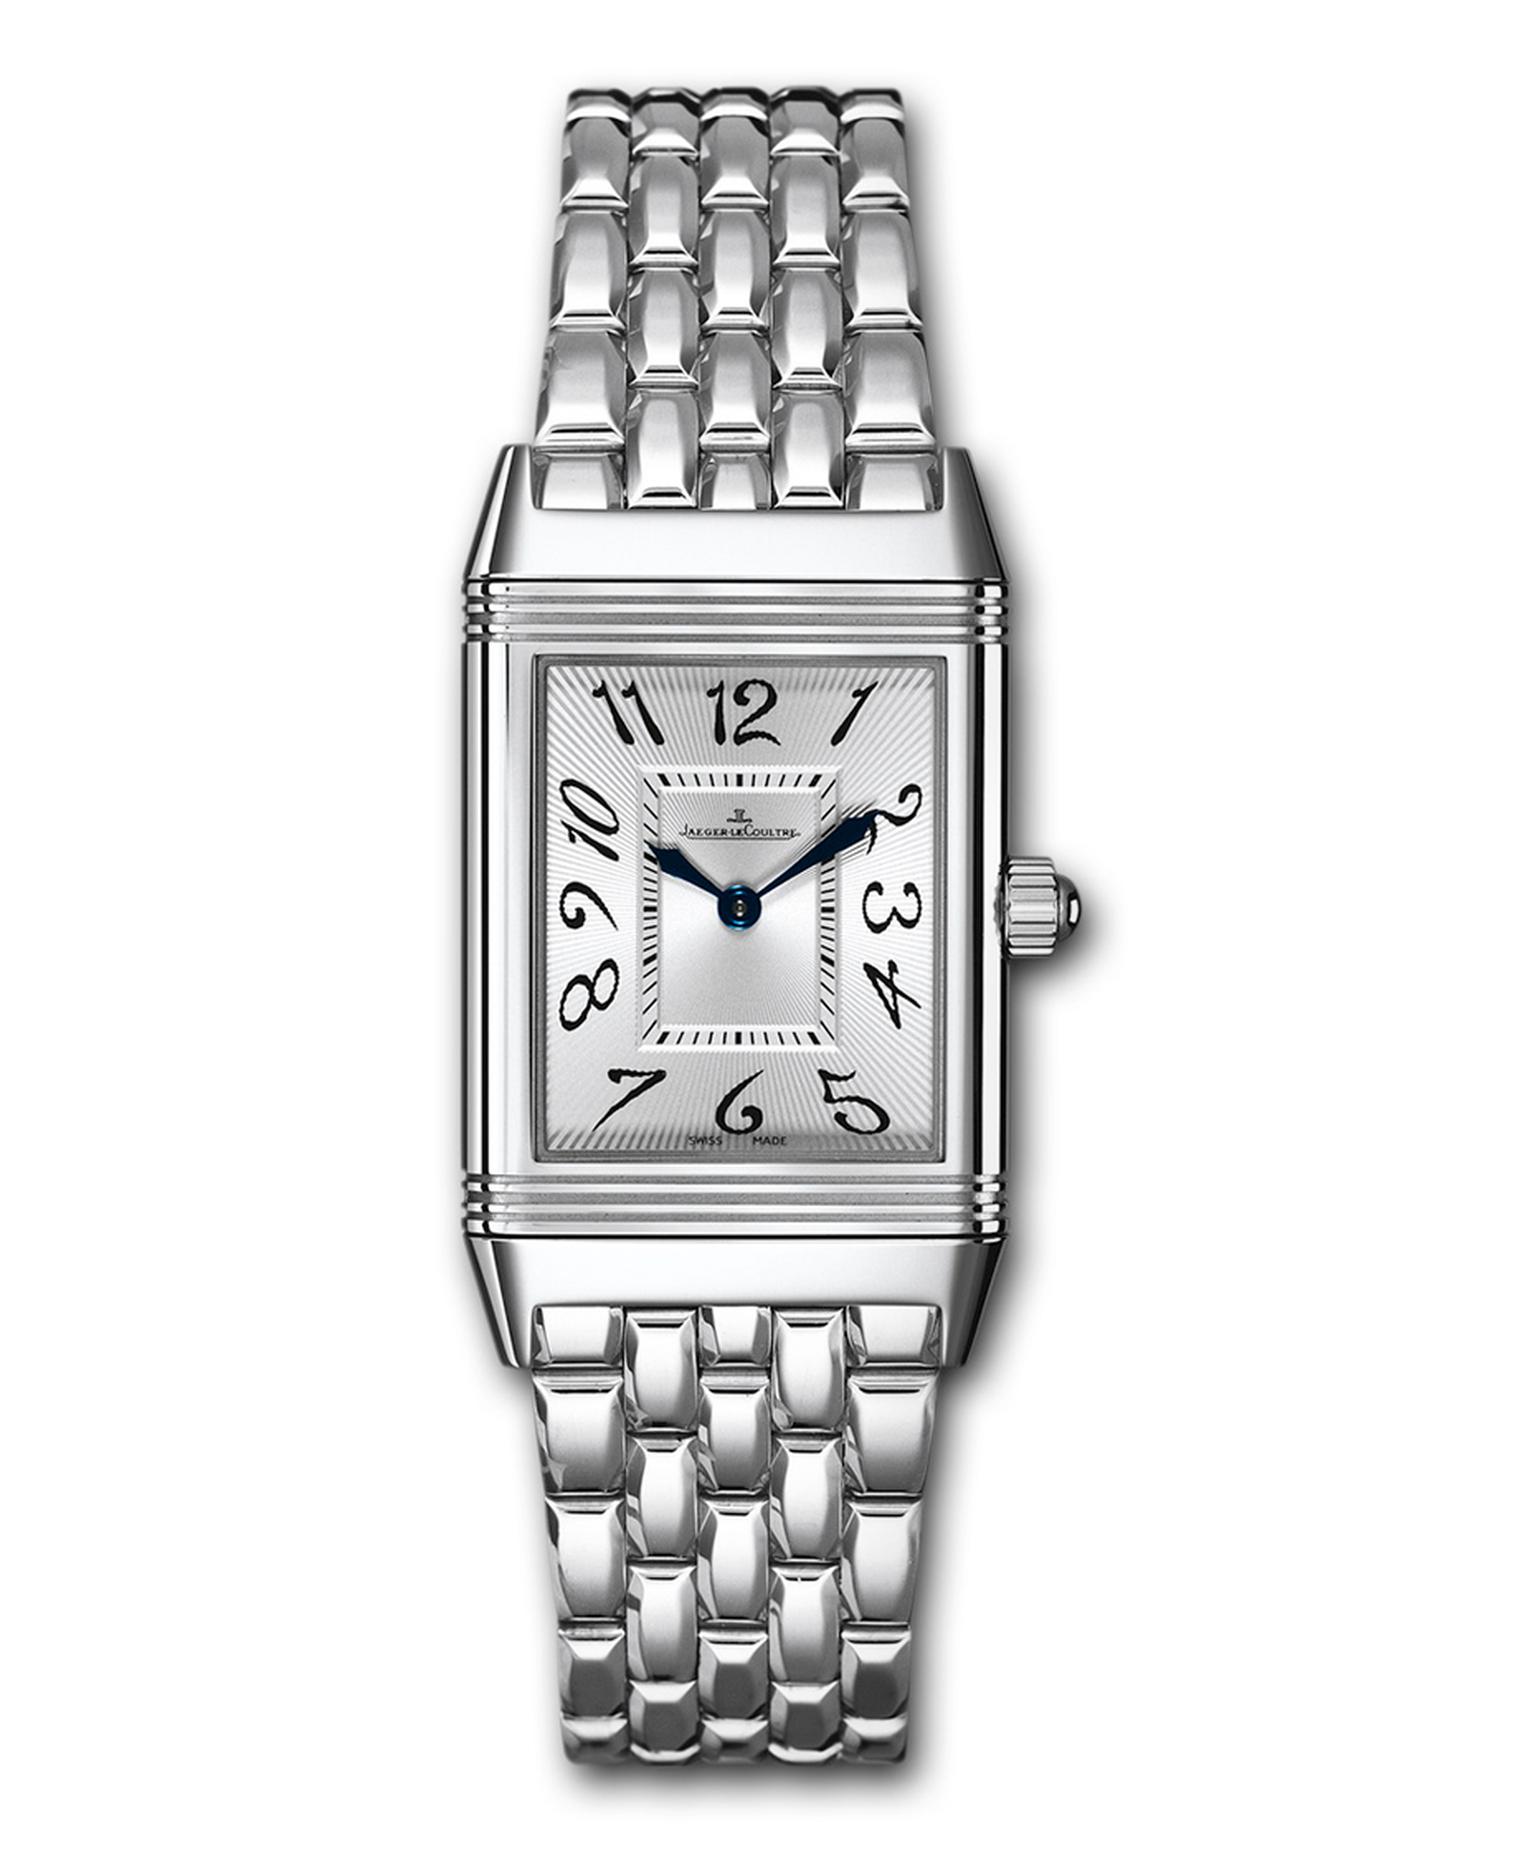 The Jaeger-LeCoultre Reverso Duetto Classique watch in stainless steel featuring a silvered guilloché and sunray-brushed dial and floral numerals.